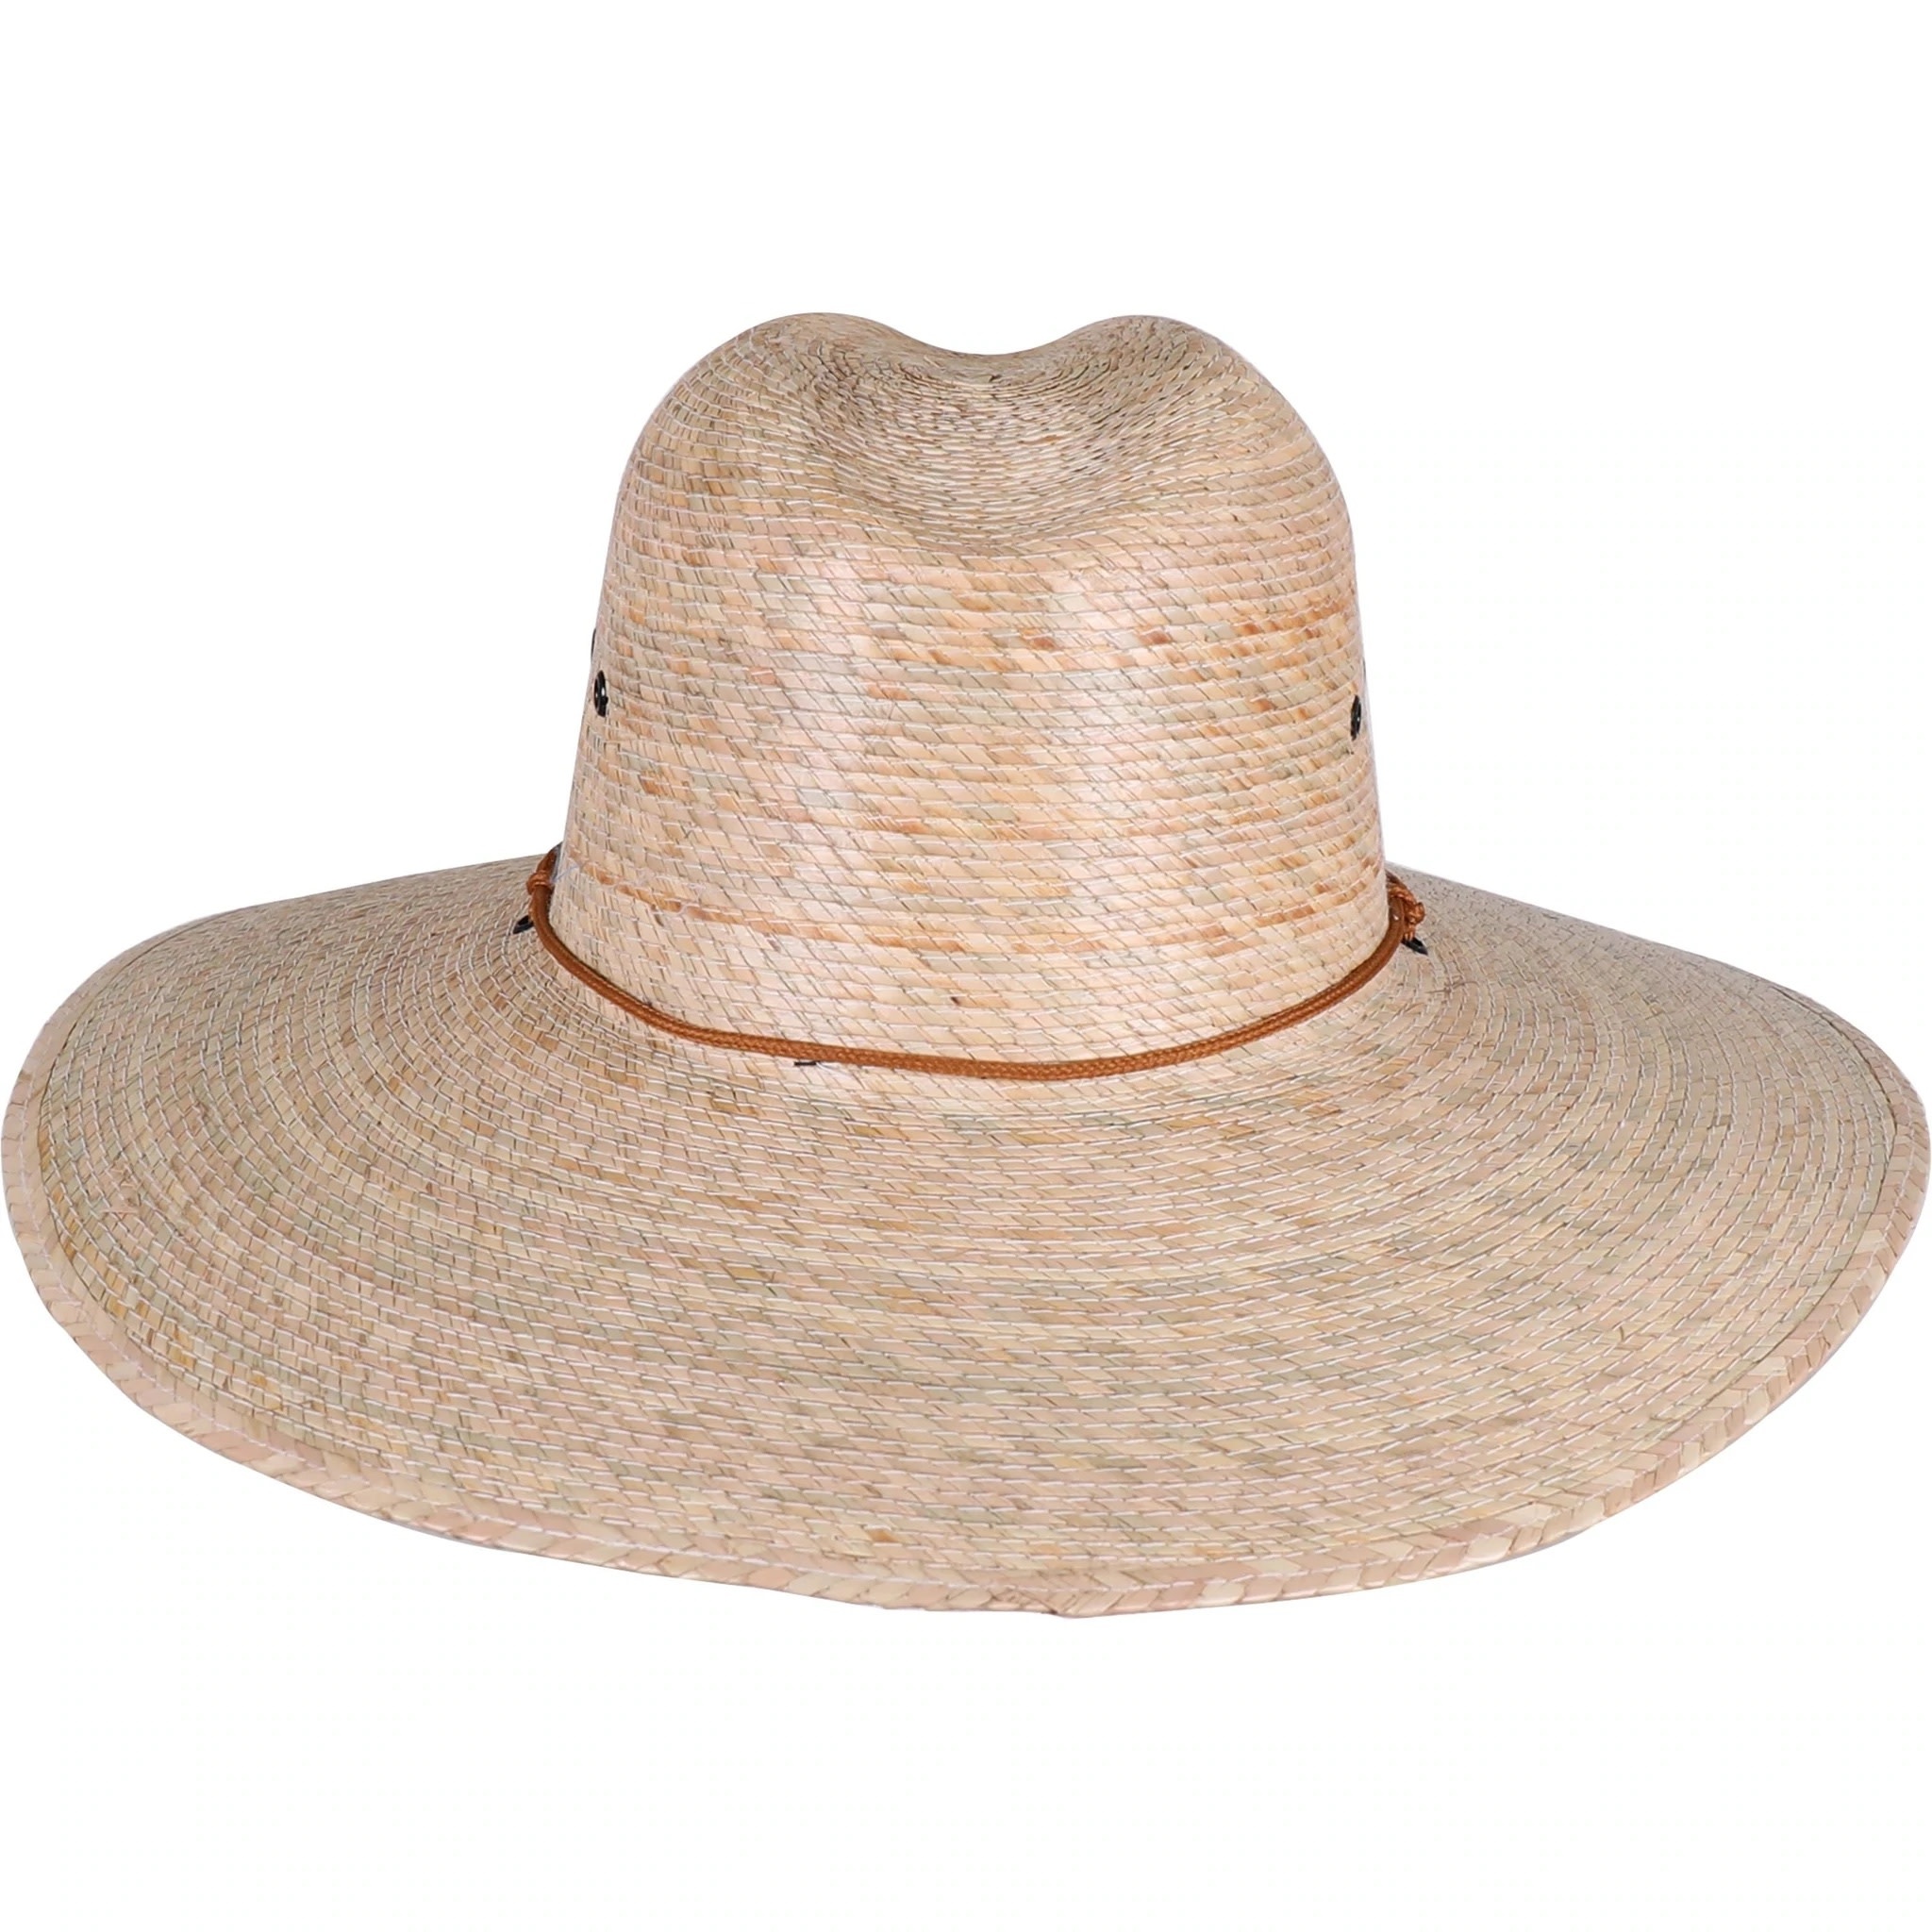 Aftco Top Caster Packable Straw Hat - Angler's Choice Tackle